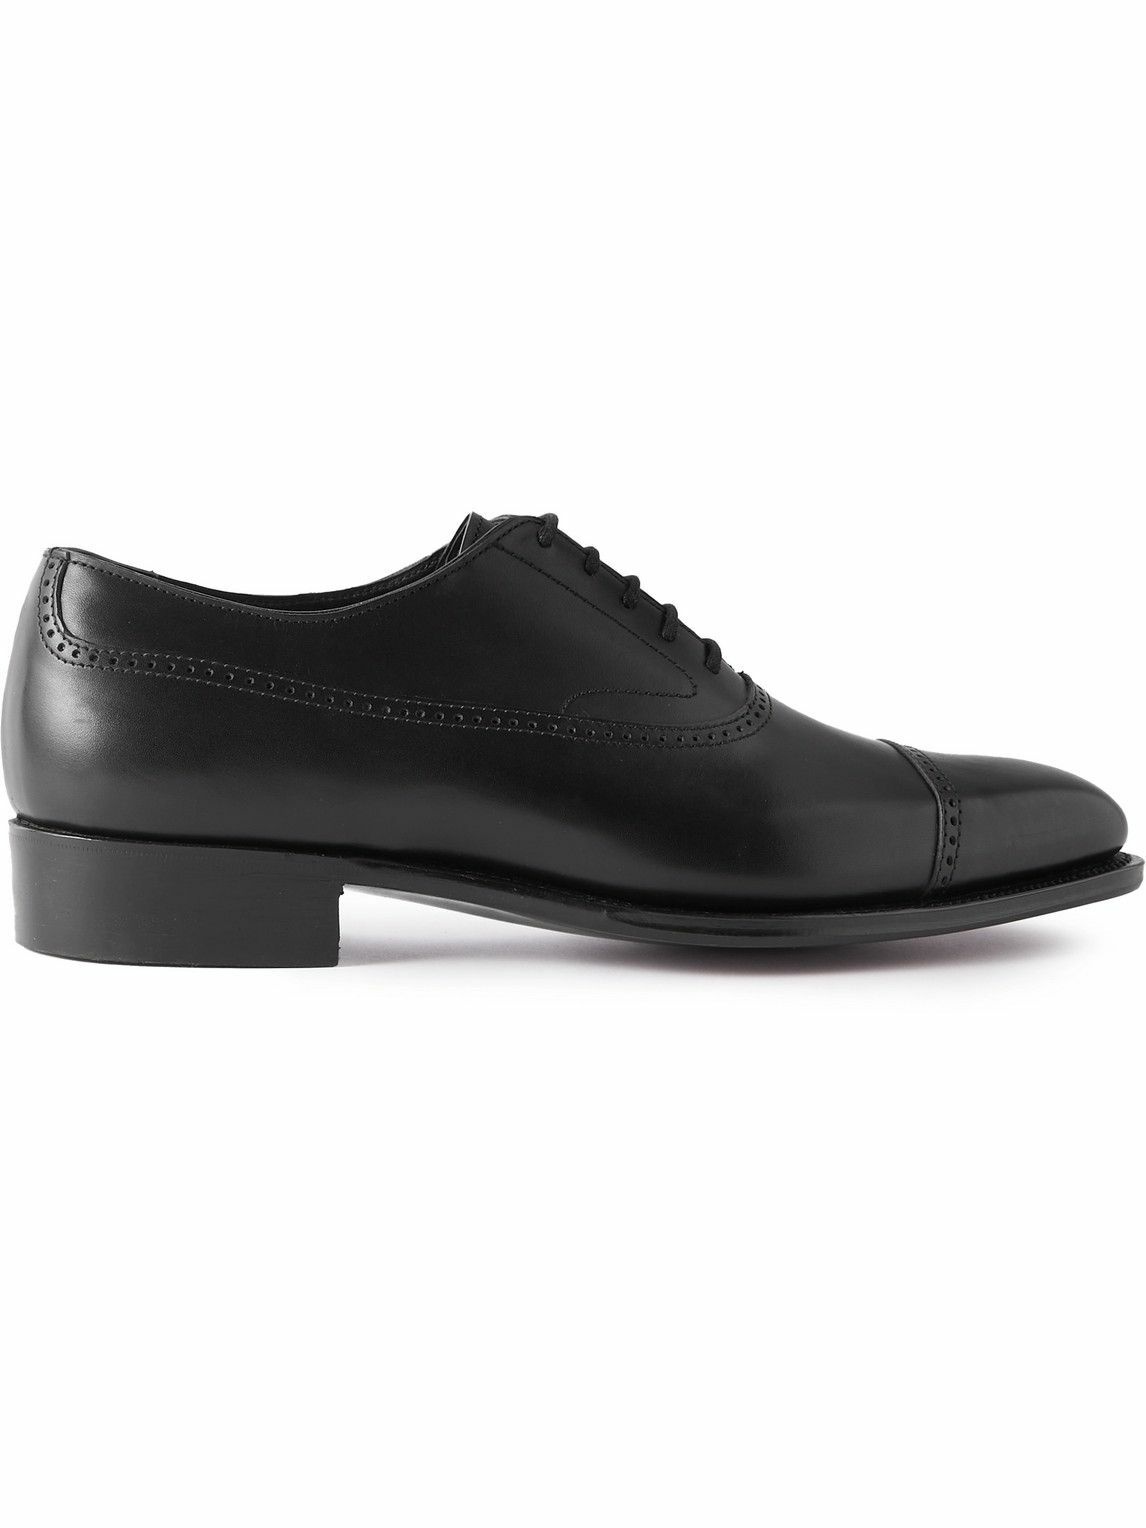 George Cleverley - Charles Leather Oxford Shoes - Black George Cleverley